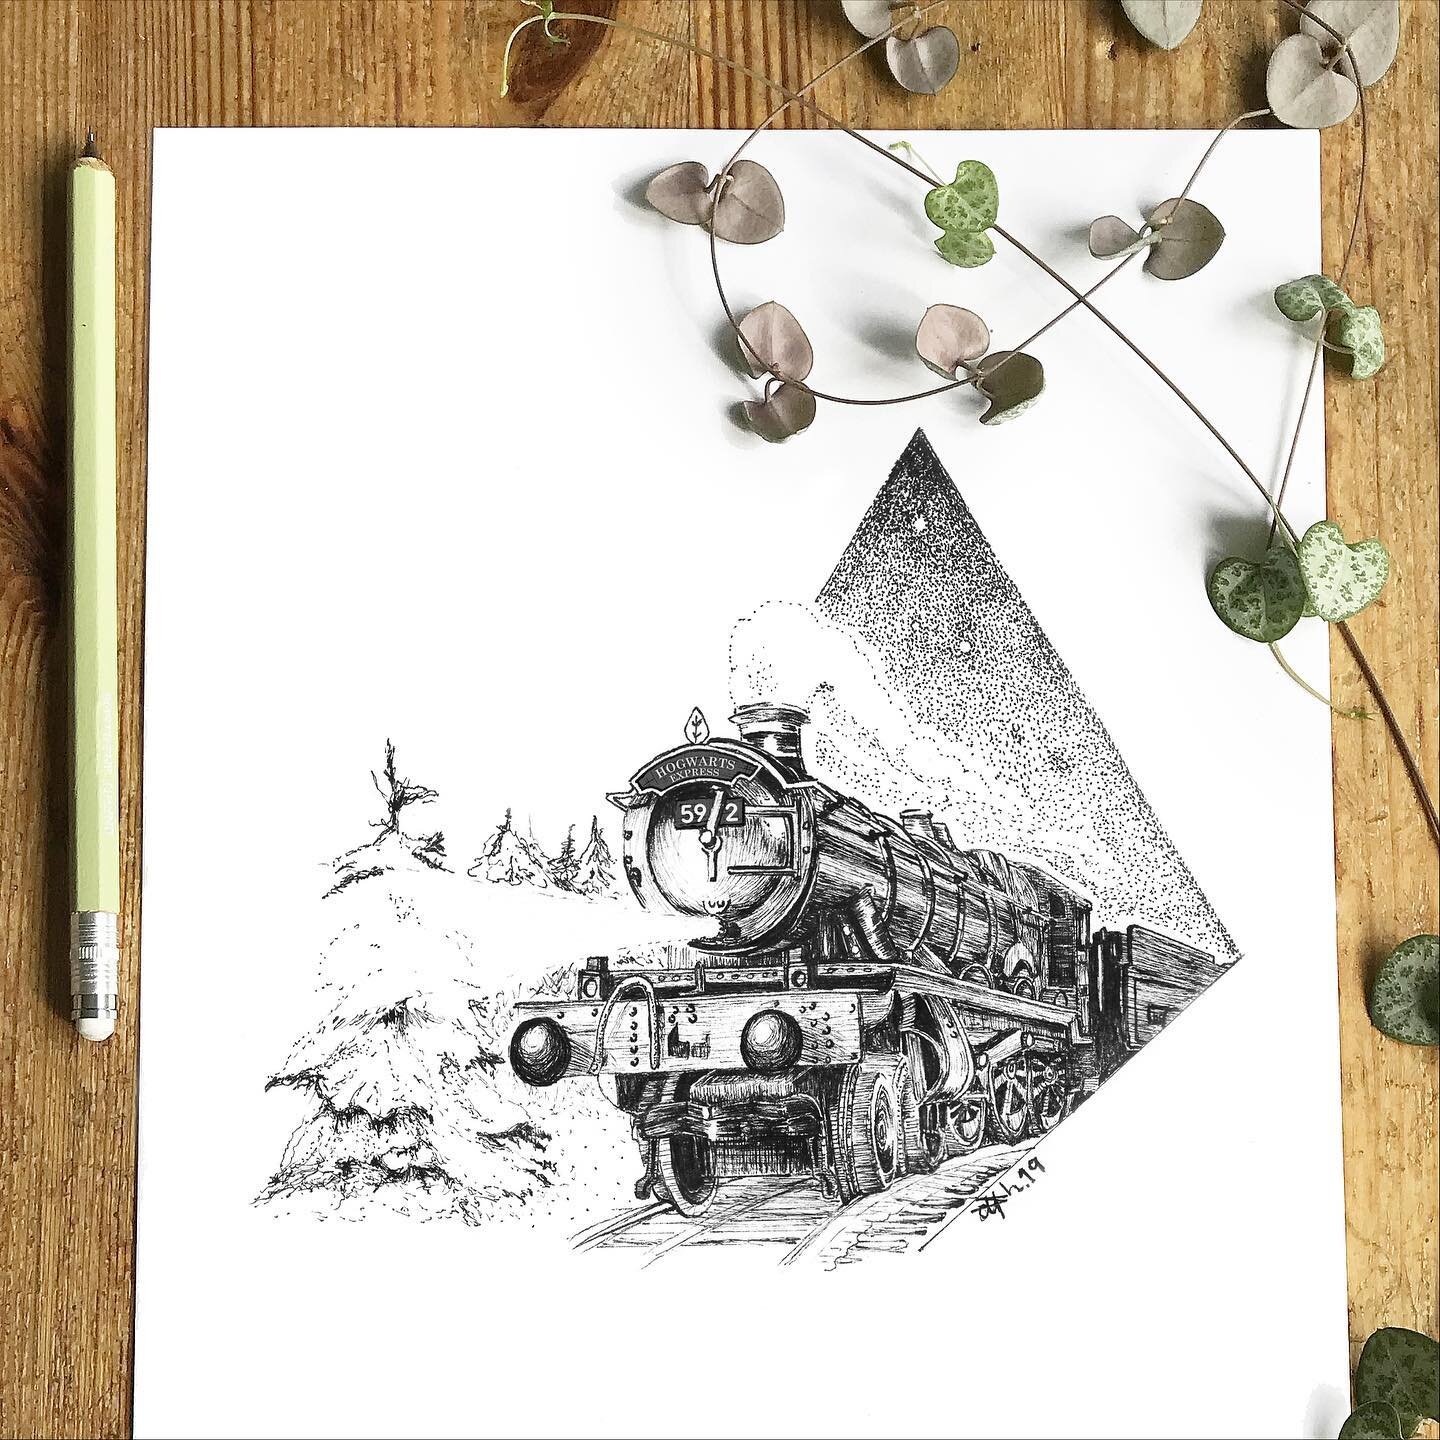 I N K T O B E R 11/31 snow
Some Hogwarts Express for you! The only thing I could think of to the word snow! .
Hope you have a magical Friday! .
.
.
.
@mirandasart #mirandasart .
.
#inktoberday11 #inktober2019 #inktober #snow #harrypotter #hp #potterm